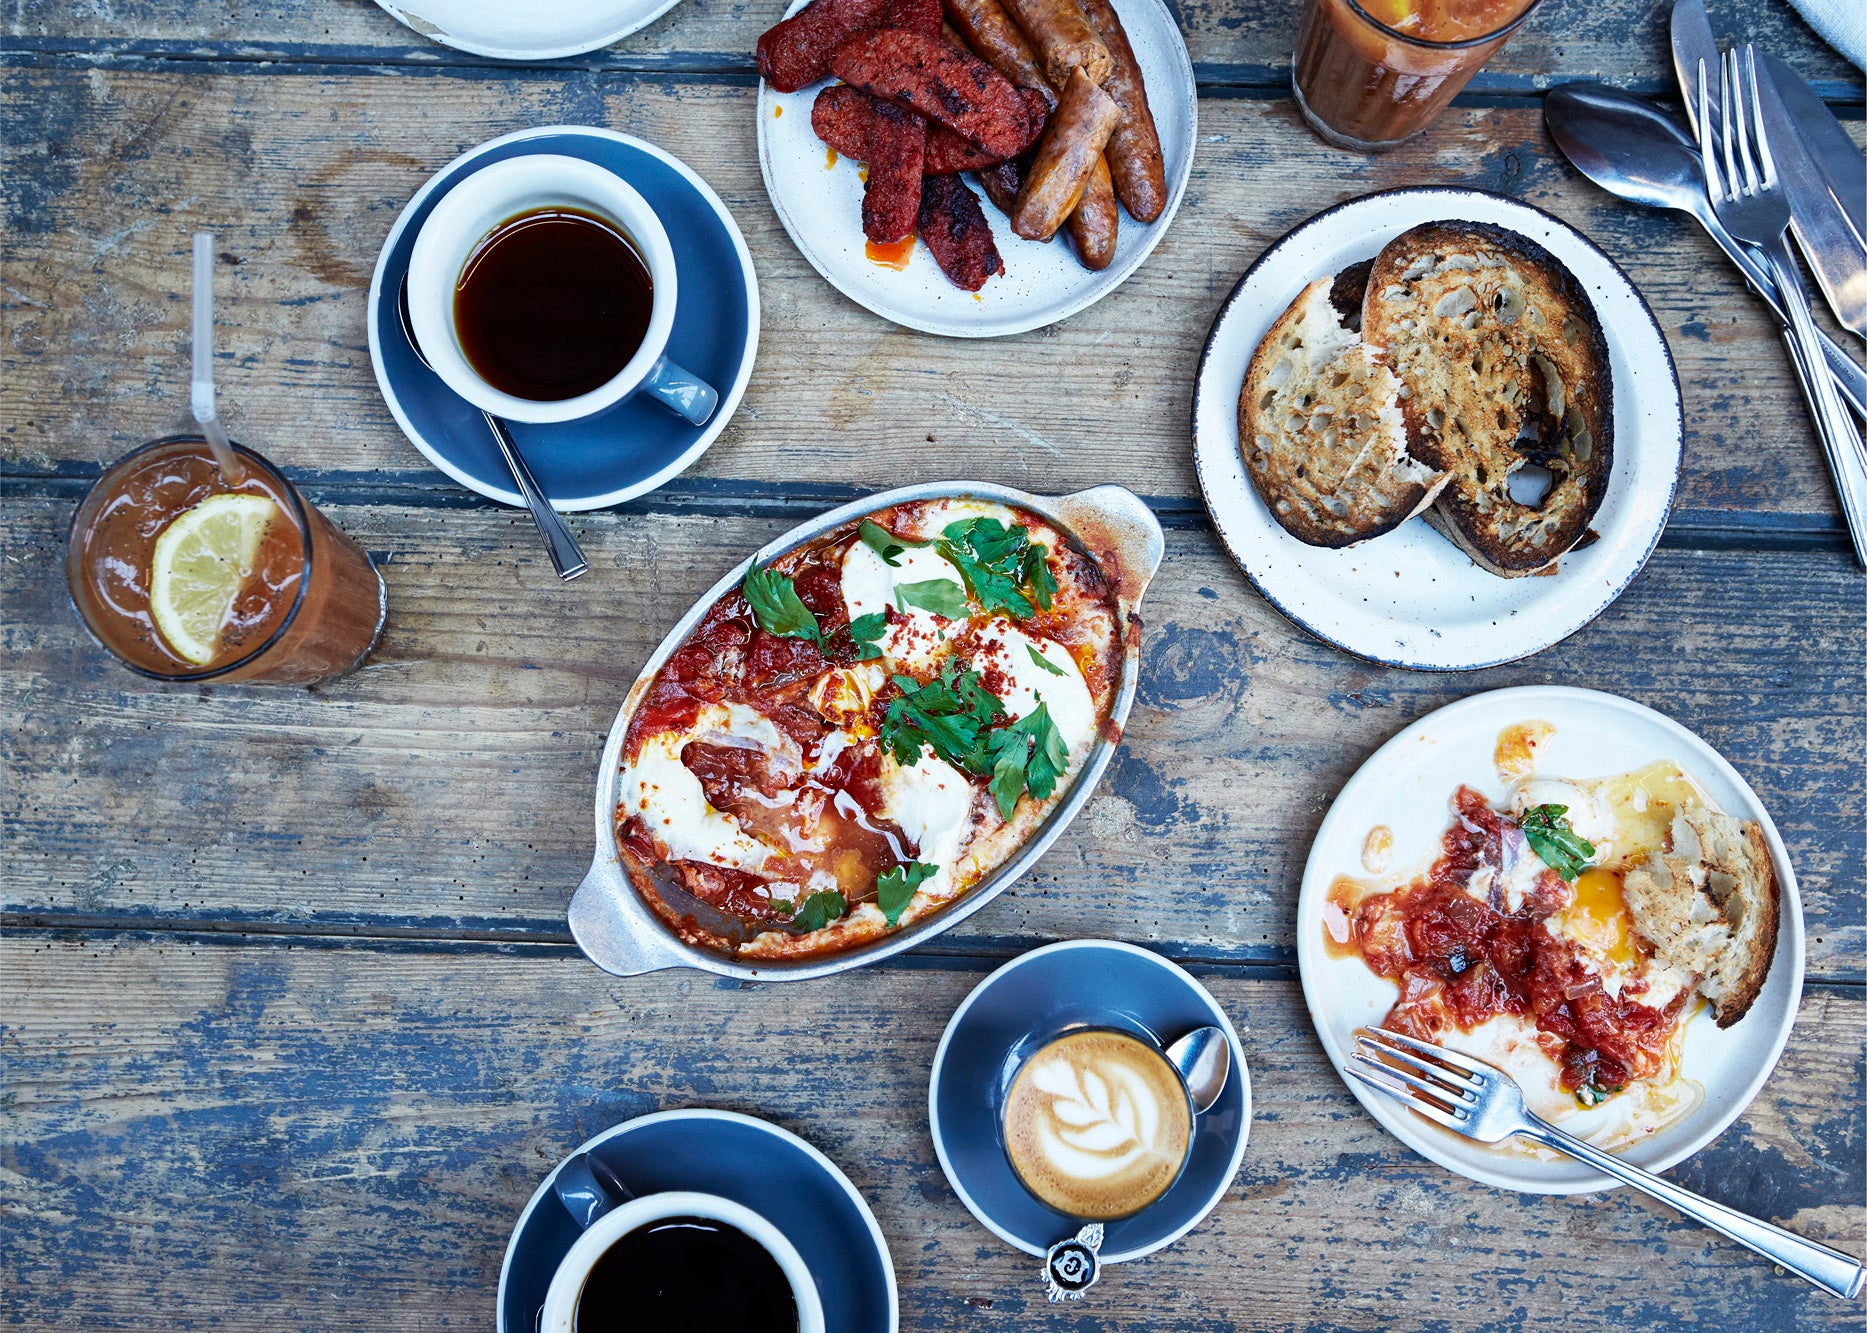 Baked Eggs, Coffee, Bloody Mary, Brunch at Caravan Exmouth Market restaurant